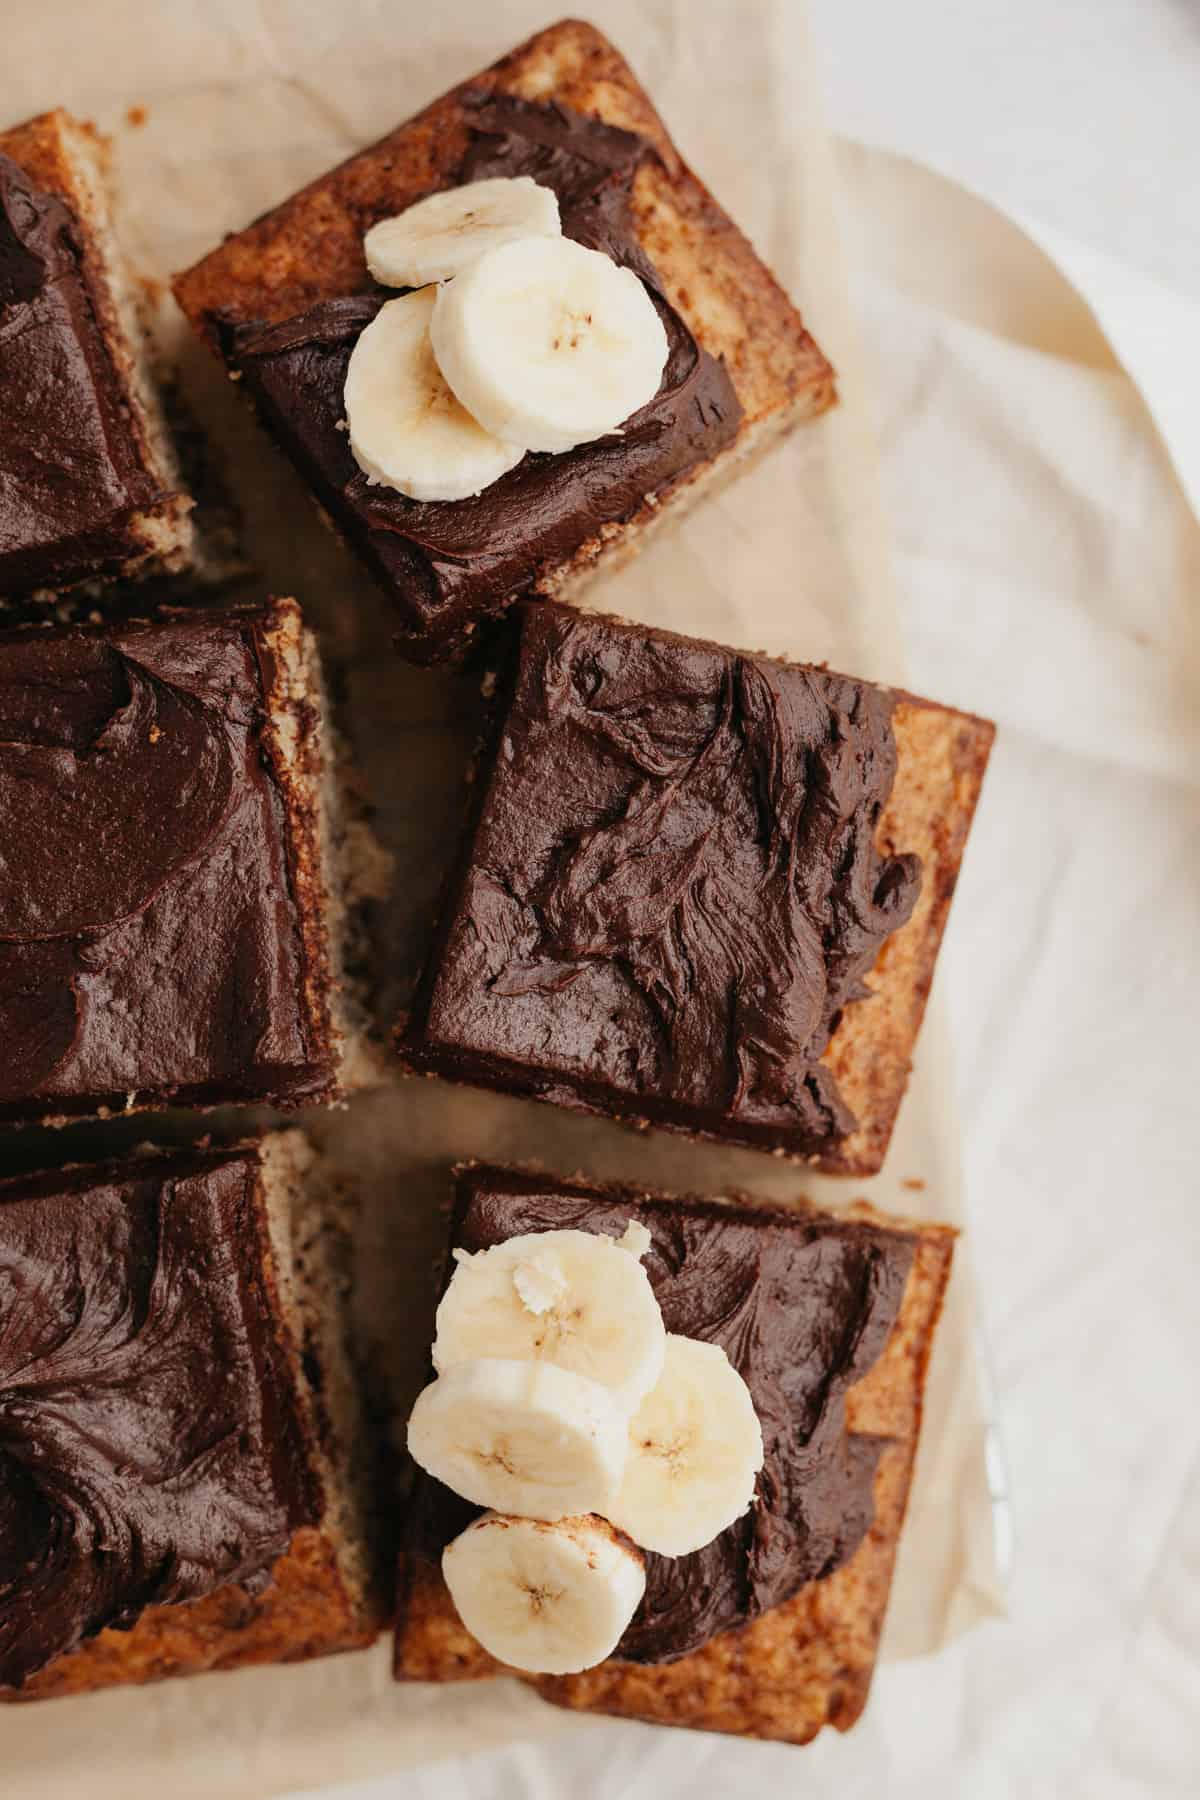 Squares of banana cake with chocolate frosting on parchment paper.